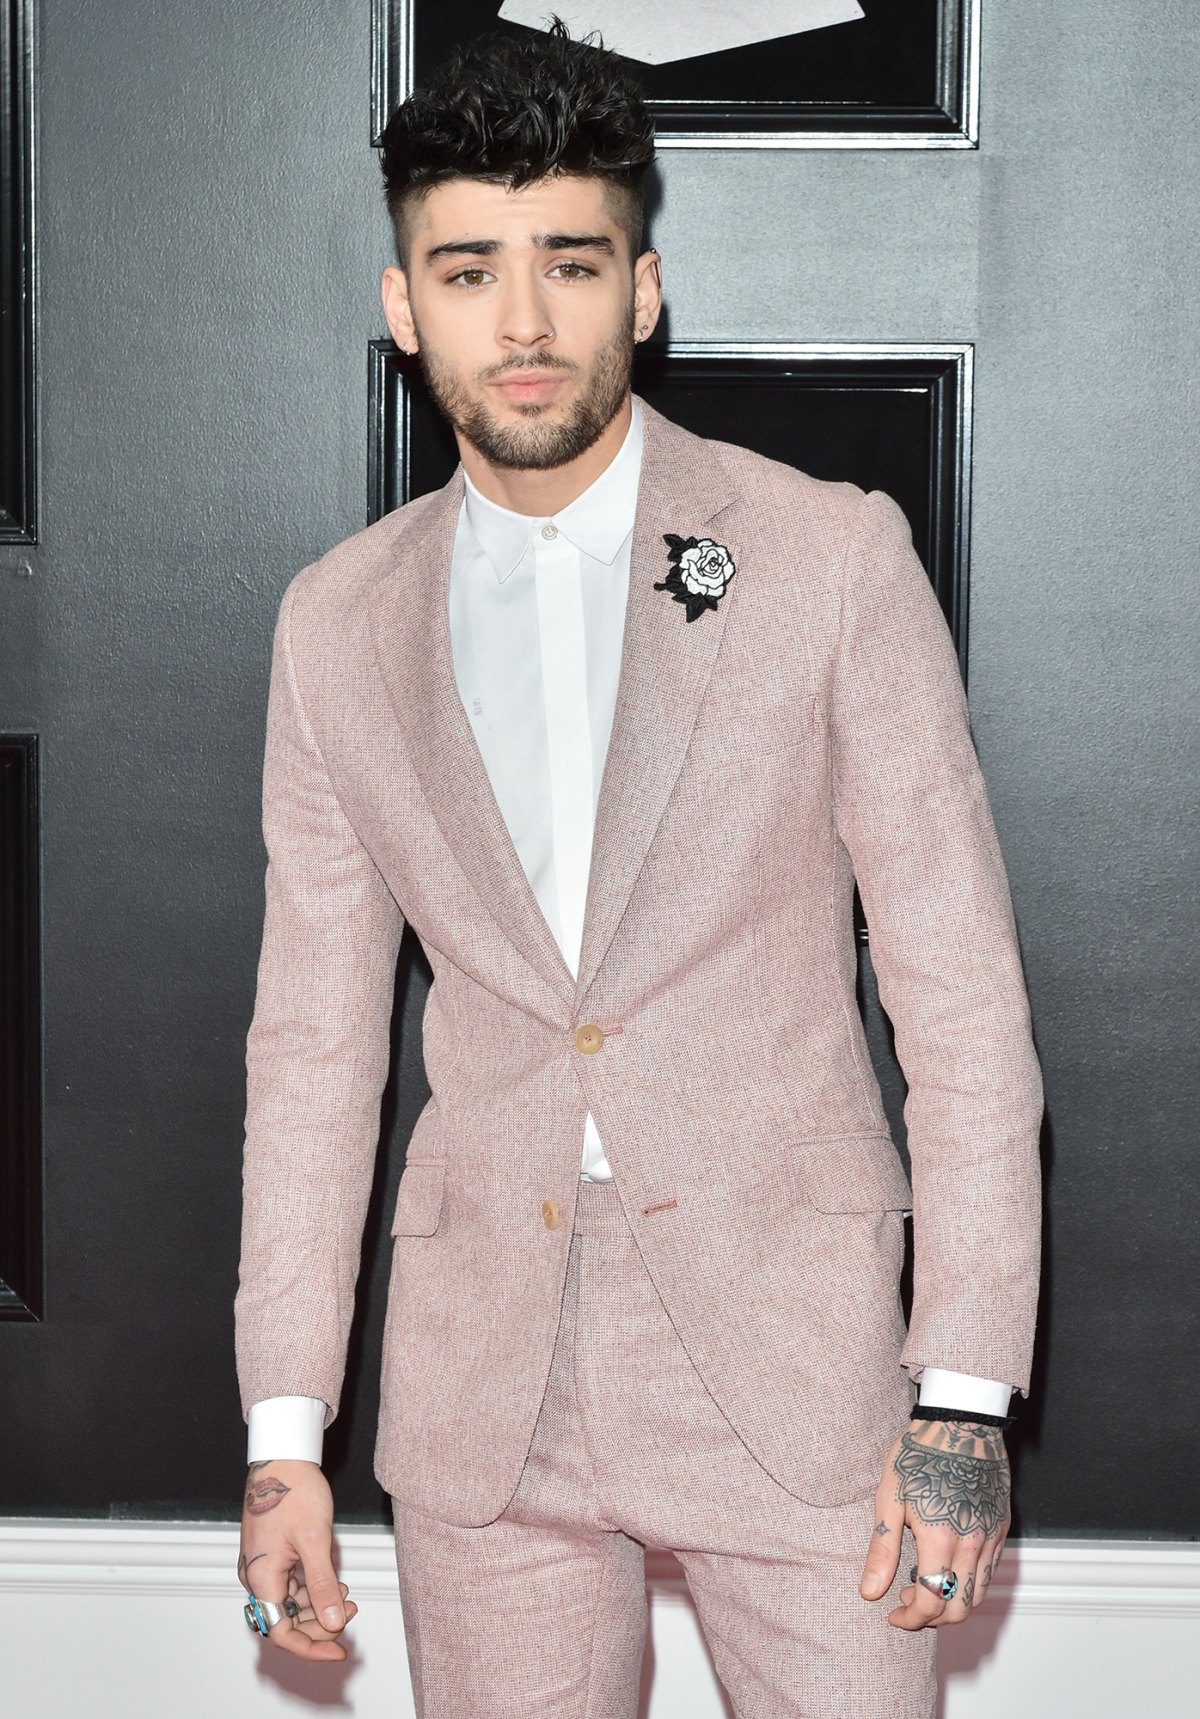 Zayn Malik Through The Years From One Direction To Solo Photos